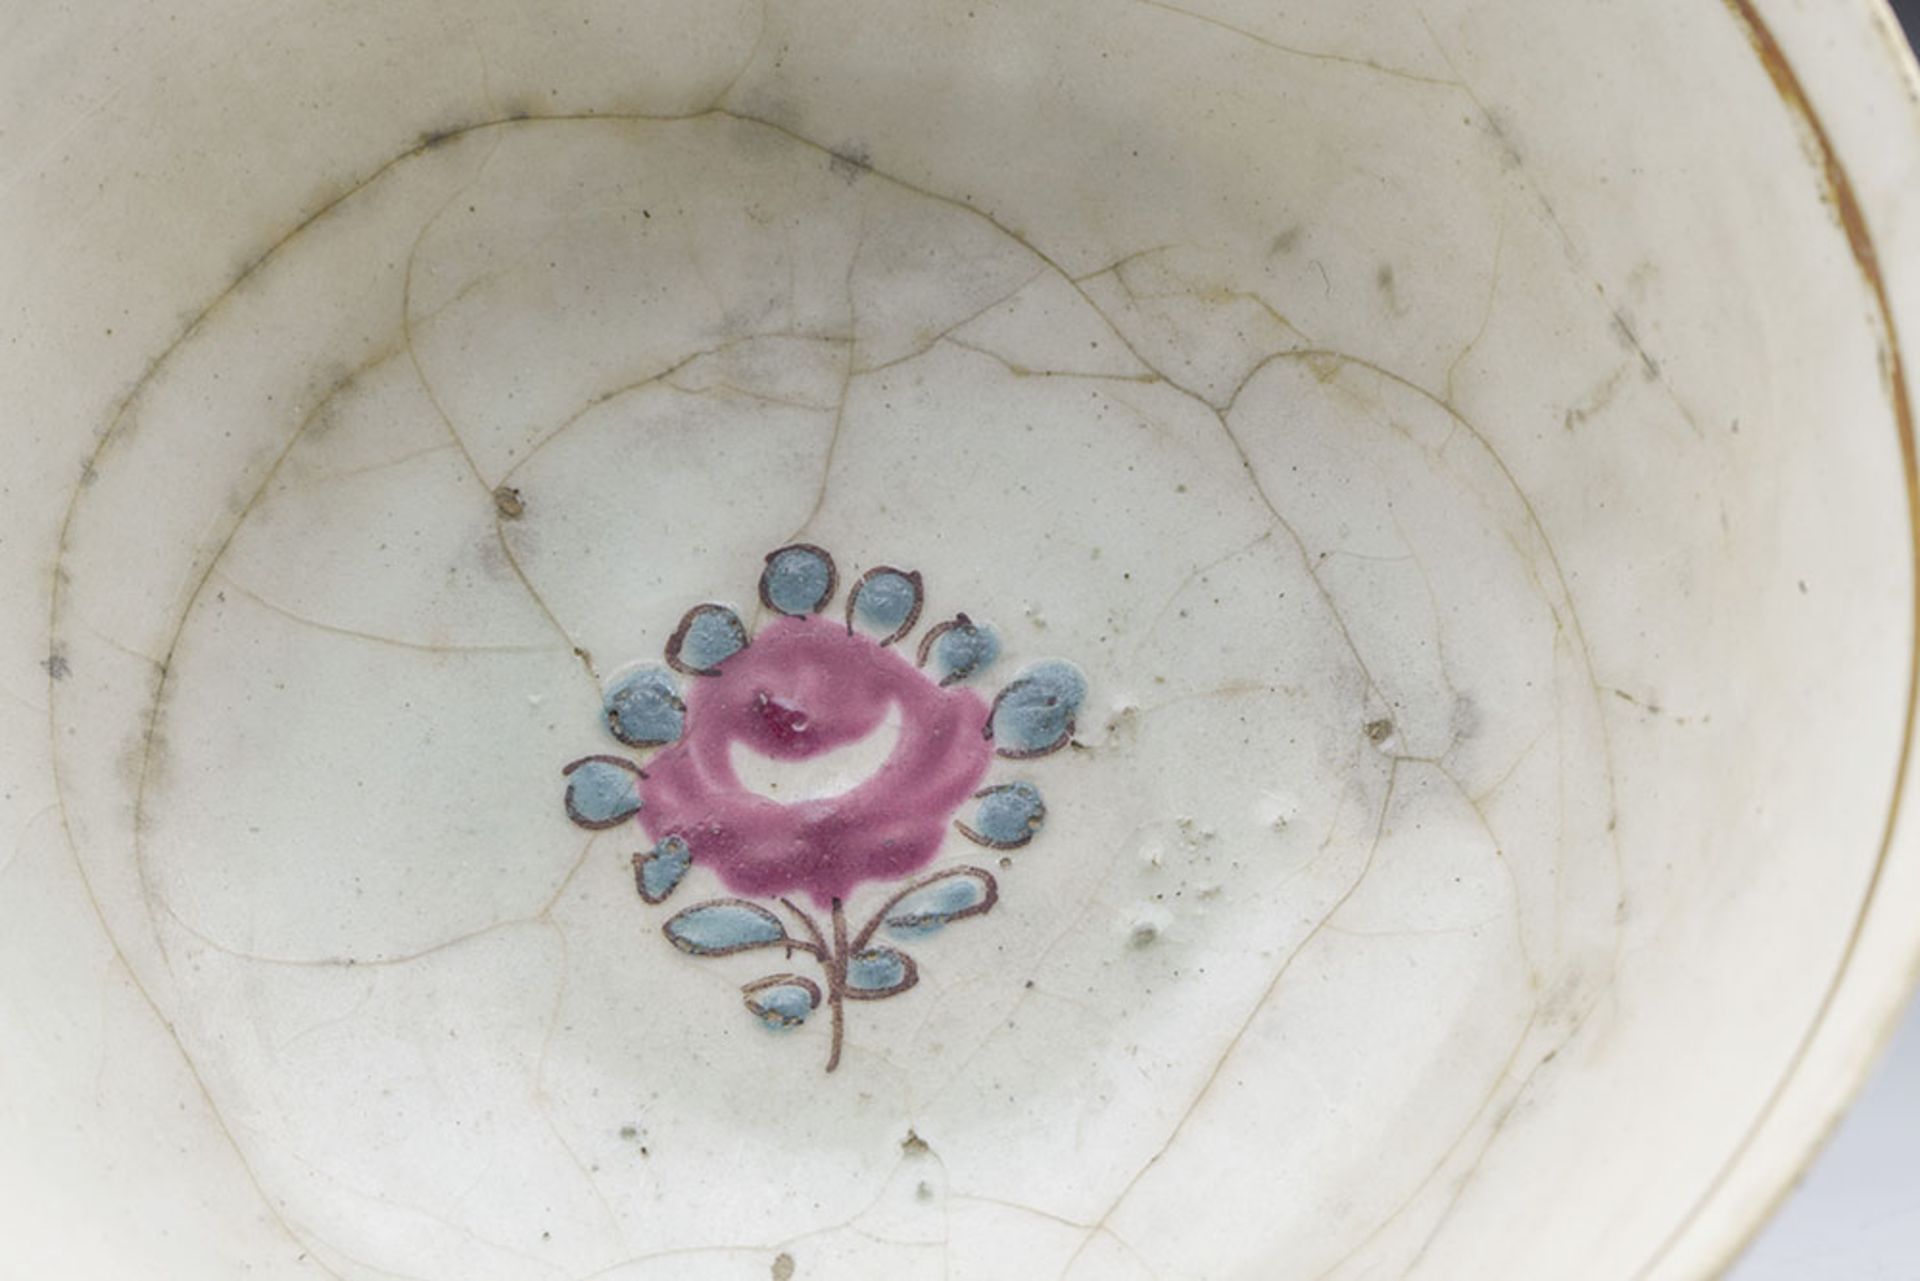 ANTIQUE MIDDLE EASTERN BOWL WITH FLORAL GARLANDS 17/18TH C. - Image 5 of 12